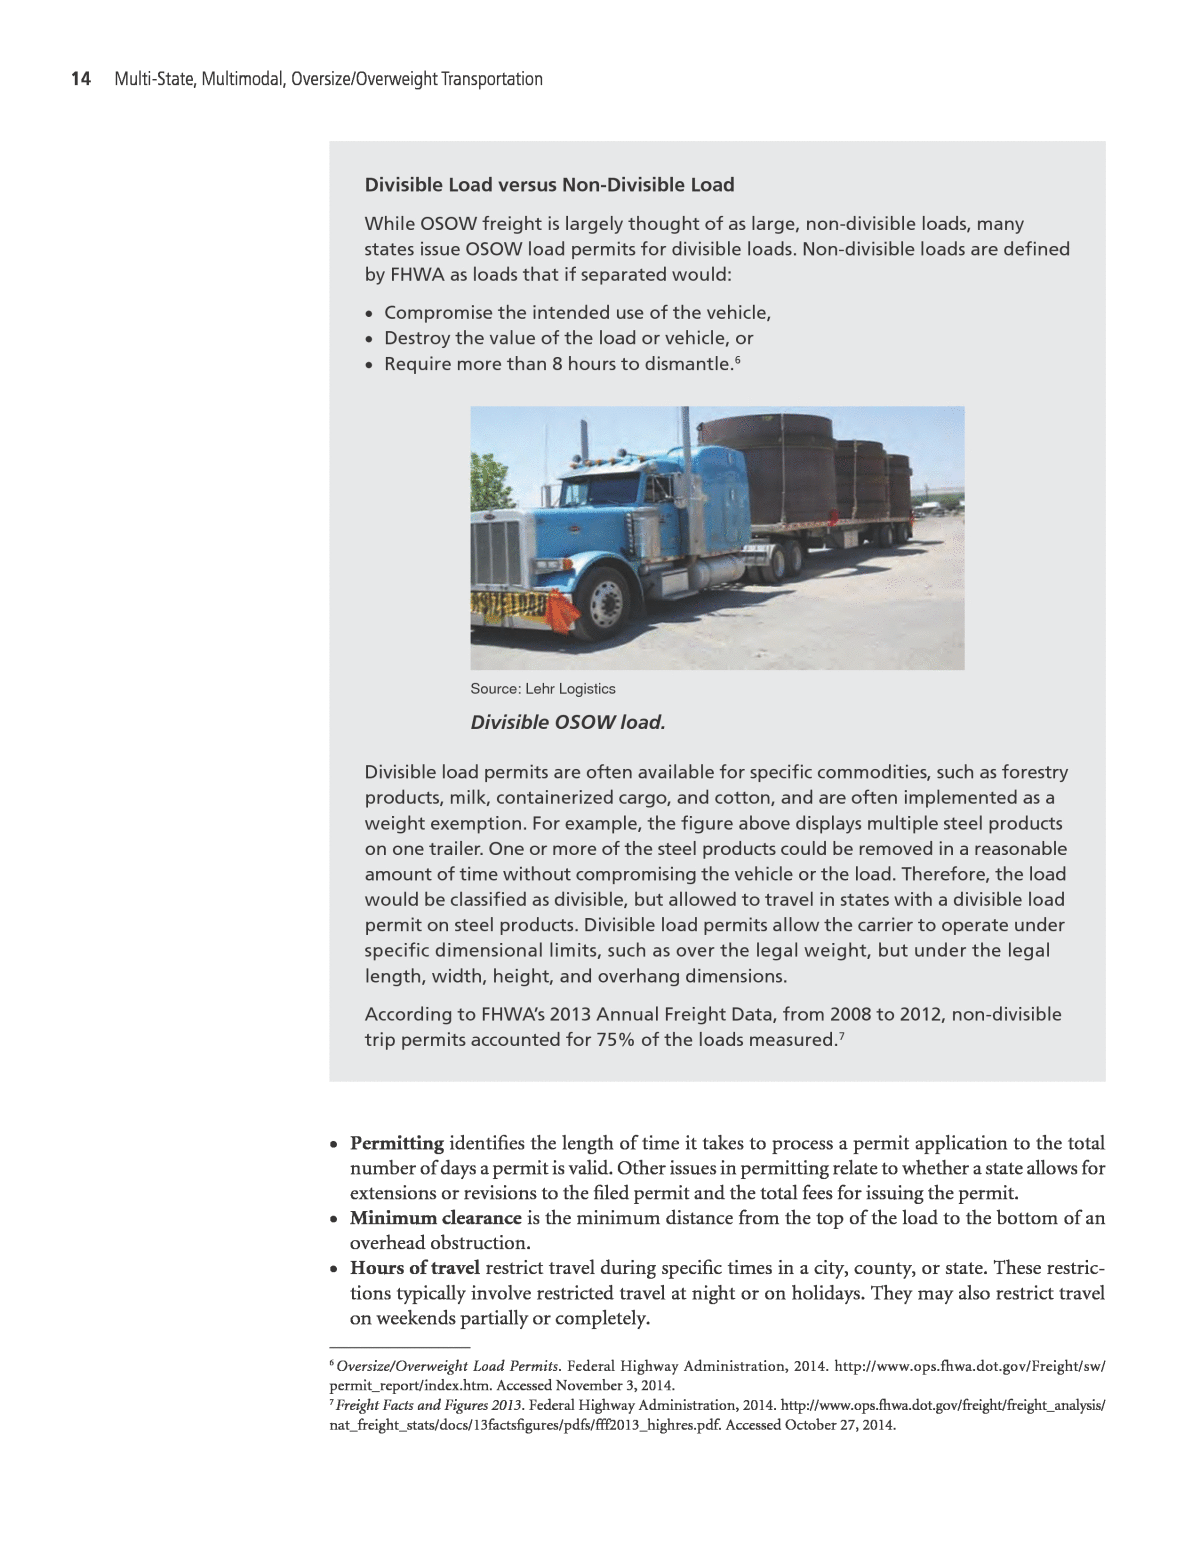 What are some of the daily maximum weight loads for oversize load trucks?